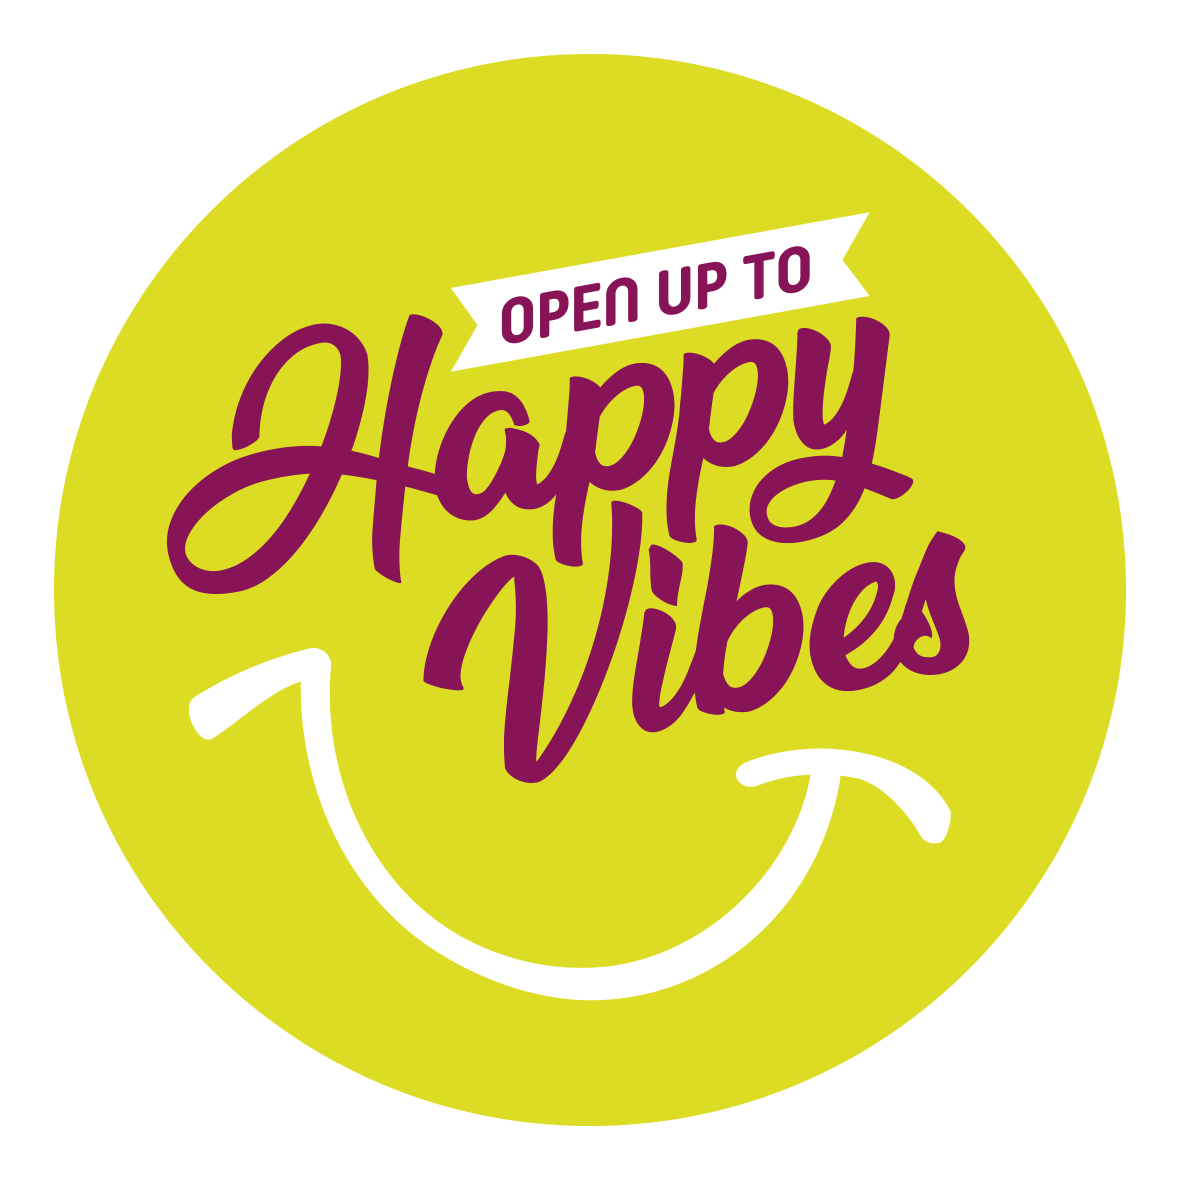 Open Up to Happy Vibes!